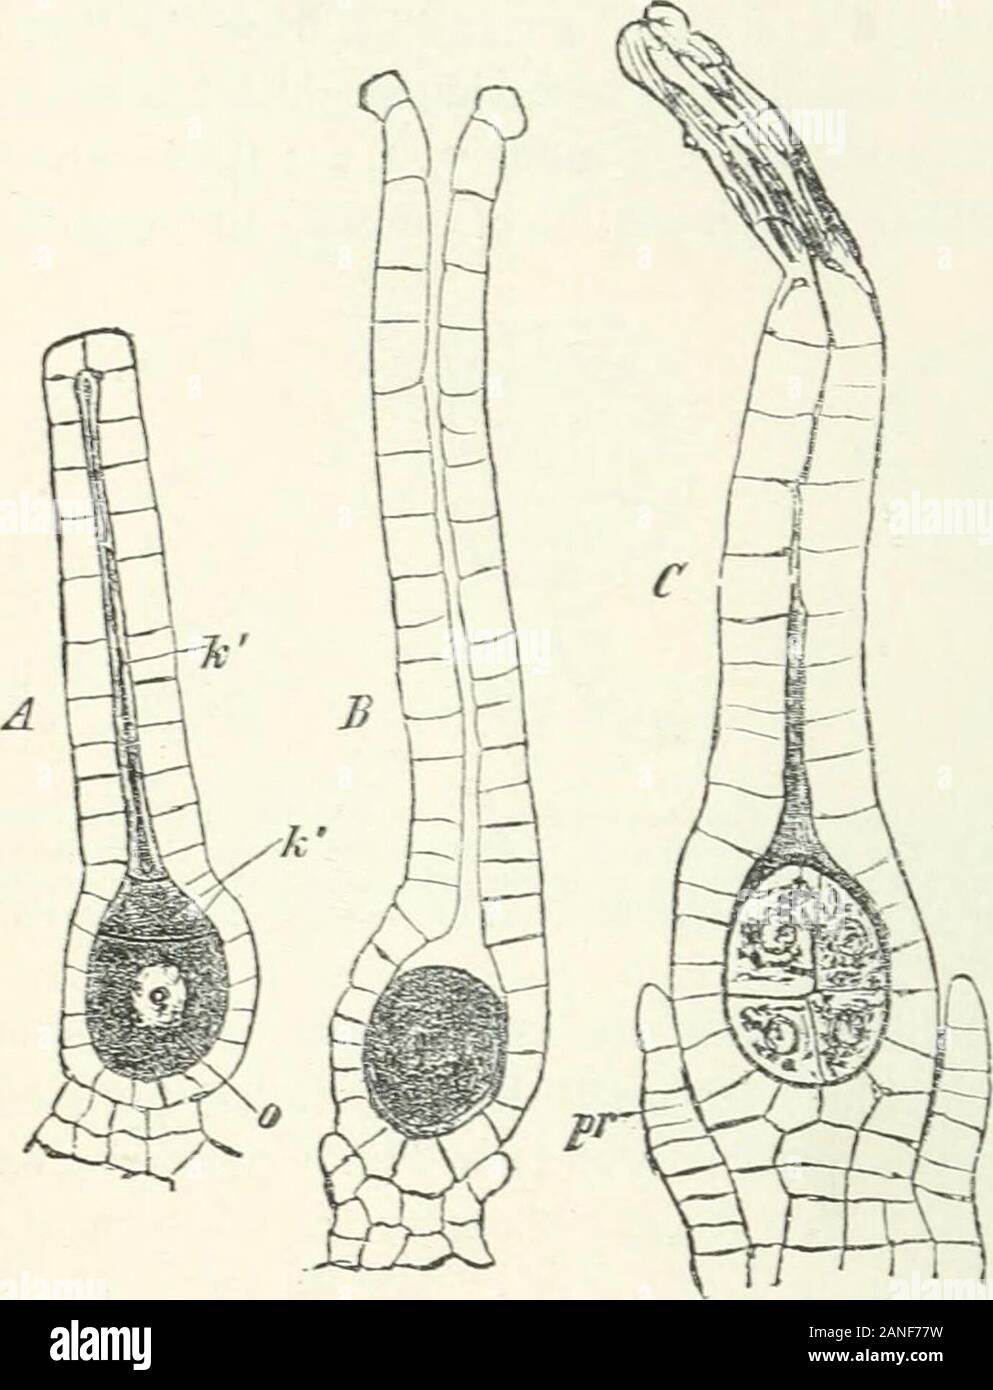 Organography of plants, especially of the archegoniatae and spermaphyta . a ofthe other Bryophyta haveeither no stalk as in Riccia ora stalk (Fig. 1) which may beshort or long and is longest insome Musci. The stalk, unlikethat of the antheridium, has notmerely the function of bringingthe neck of the archegoniuminto a favourable position, but,where it is massive, is destinedto be of use to the embryo,and after fertilization has takenplace it may grow to a con-siderable extent (see Fig. 119).The embryo bores in the first instance into the stalk and may go no further,as in Nanomitrium (Fig. 120), Stock Photo